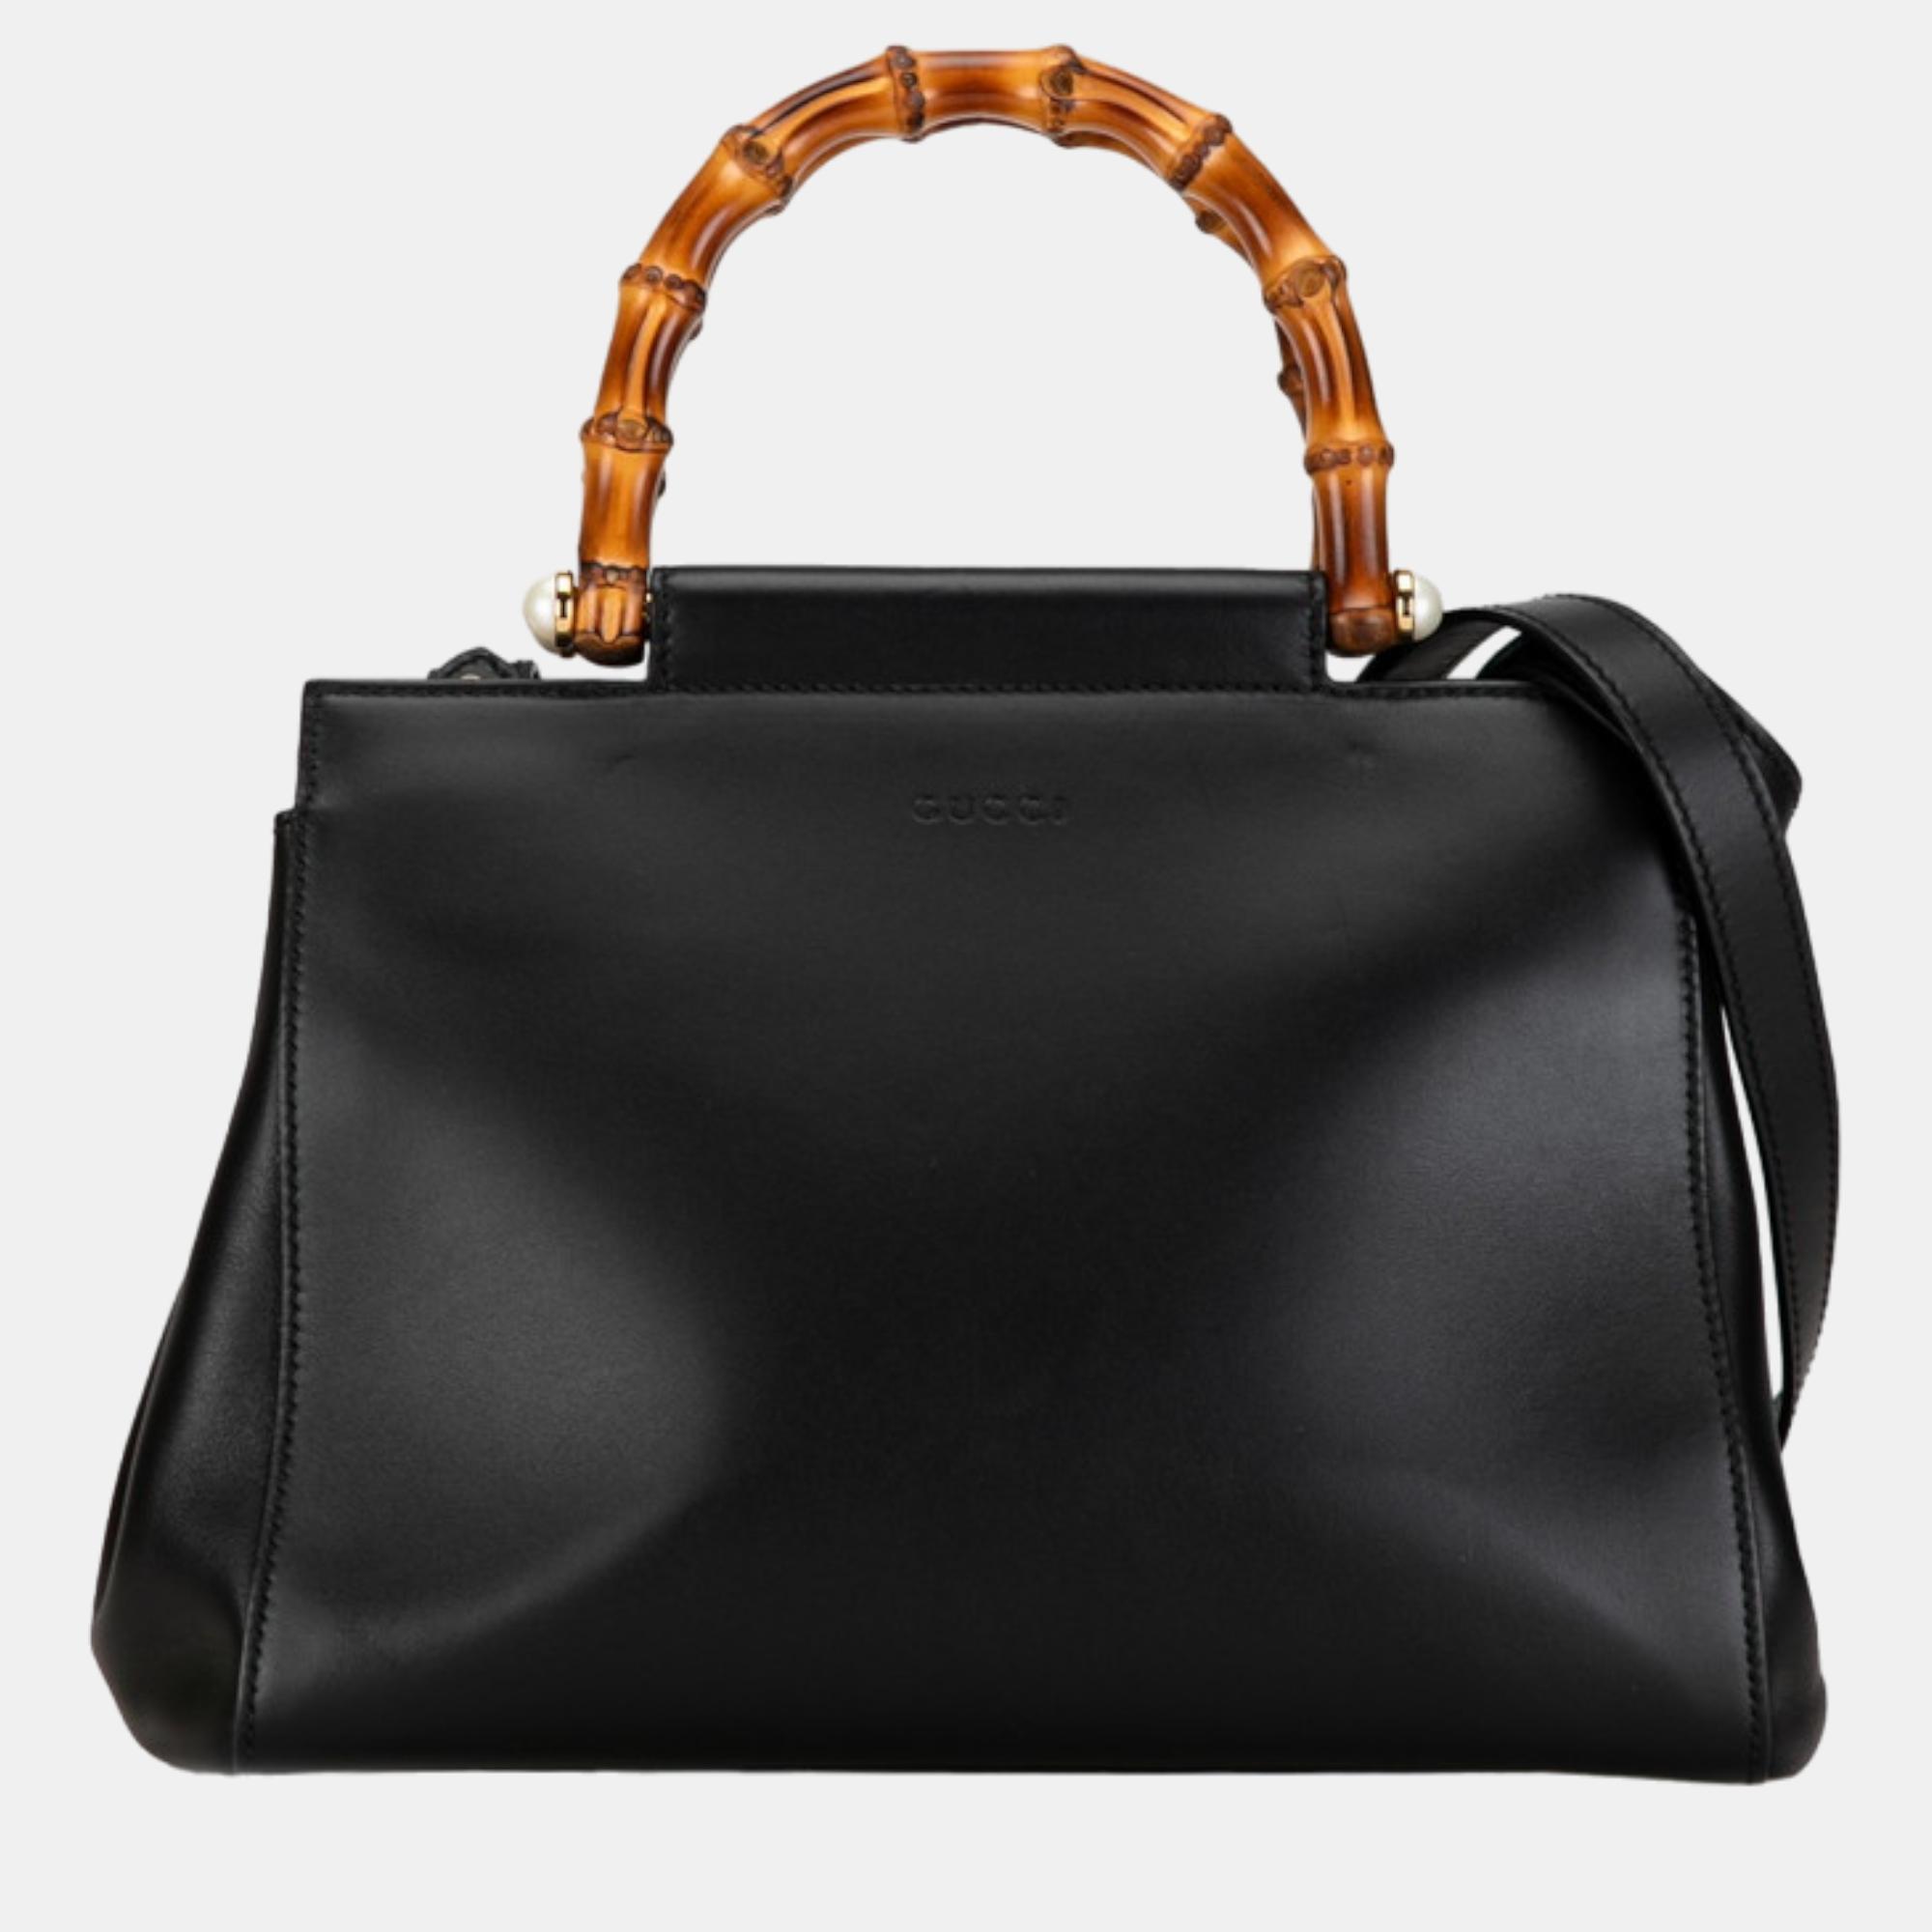 Gucci black leather bamboo nymphaea top handle bag